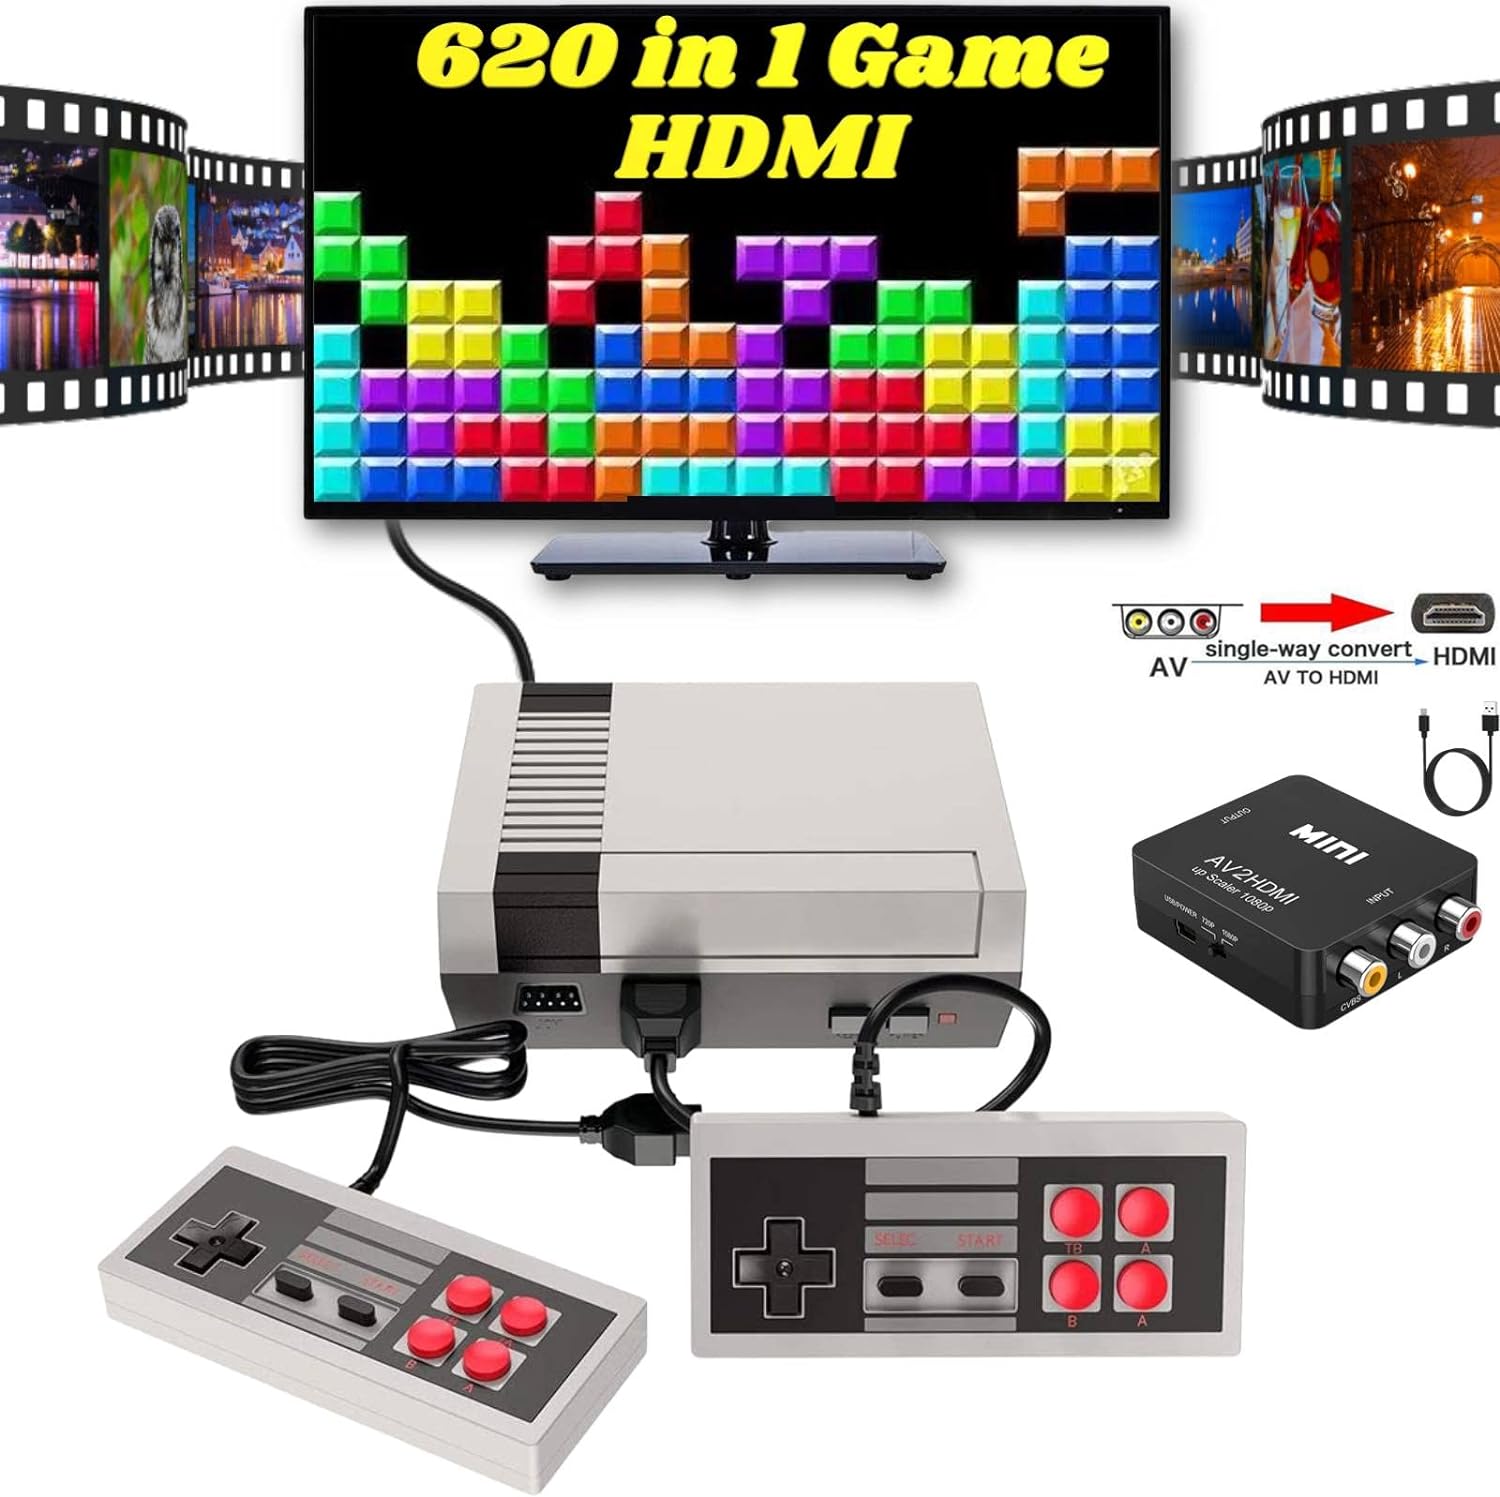 Retro Game Console,Classic Game System Built in 620 Games and 2 Classic Controllers,RCA and HDMI HD Output Plug and Play Video Games